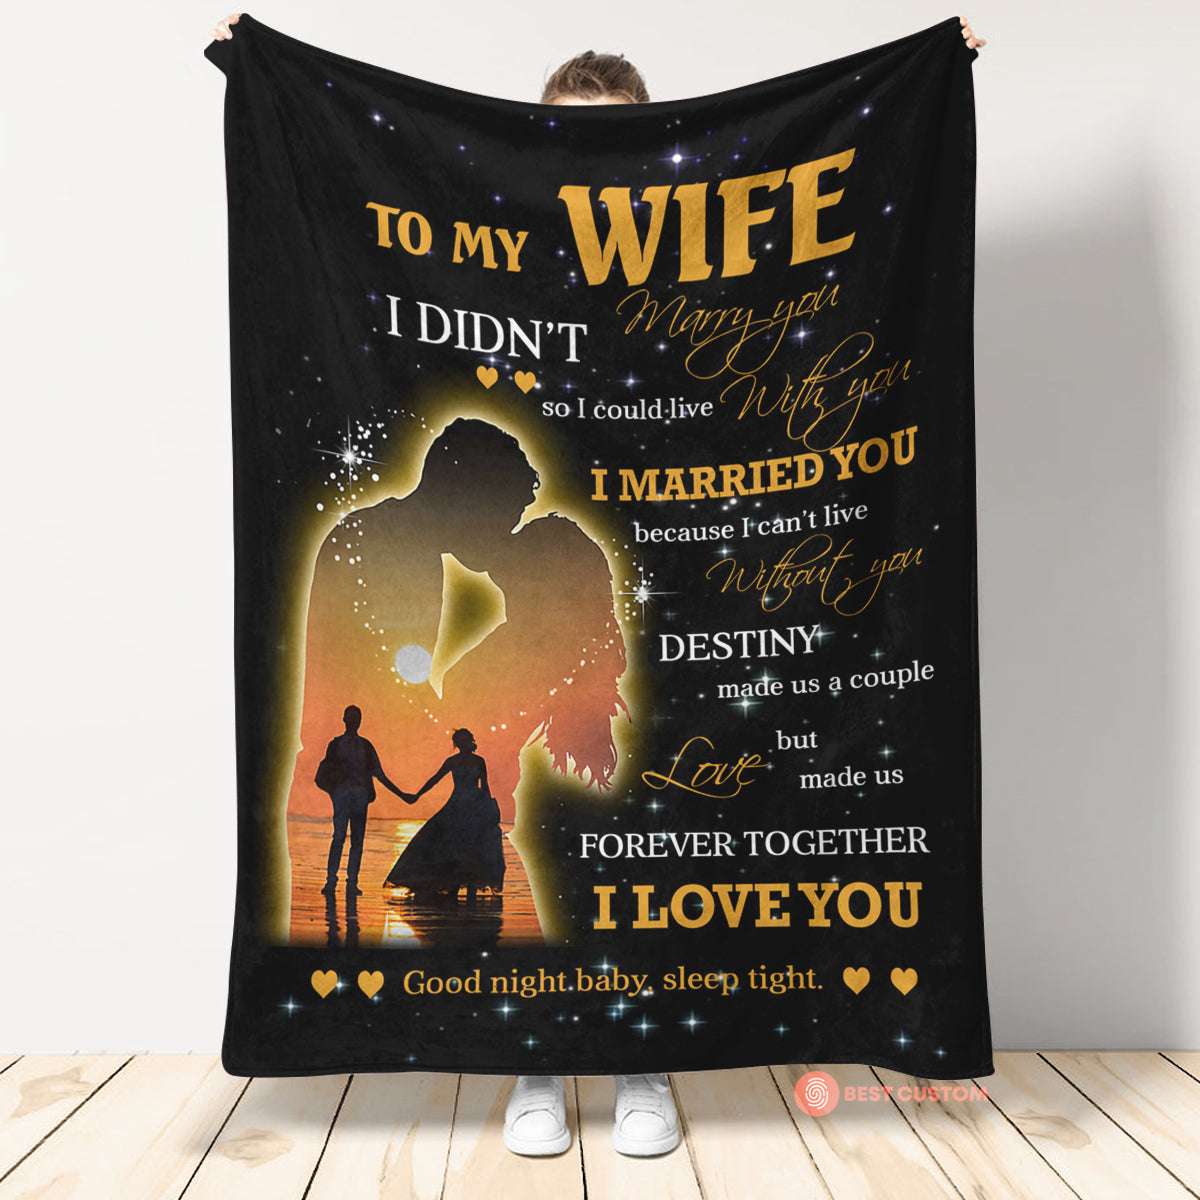 I Love You And Good Night Baby To My Wife Blanket, Best Gift For Wife